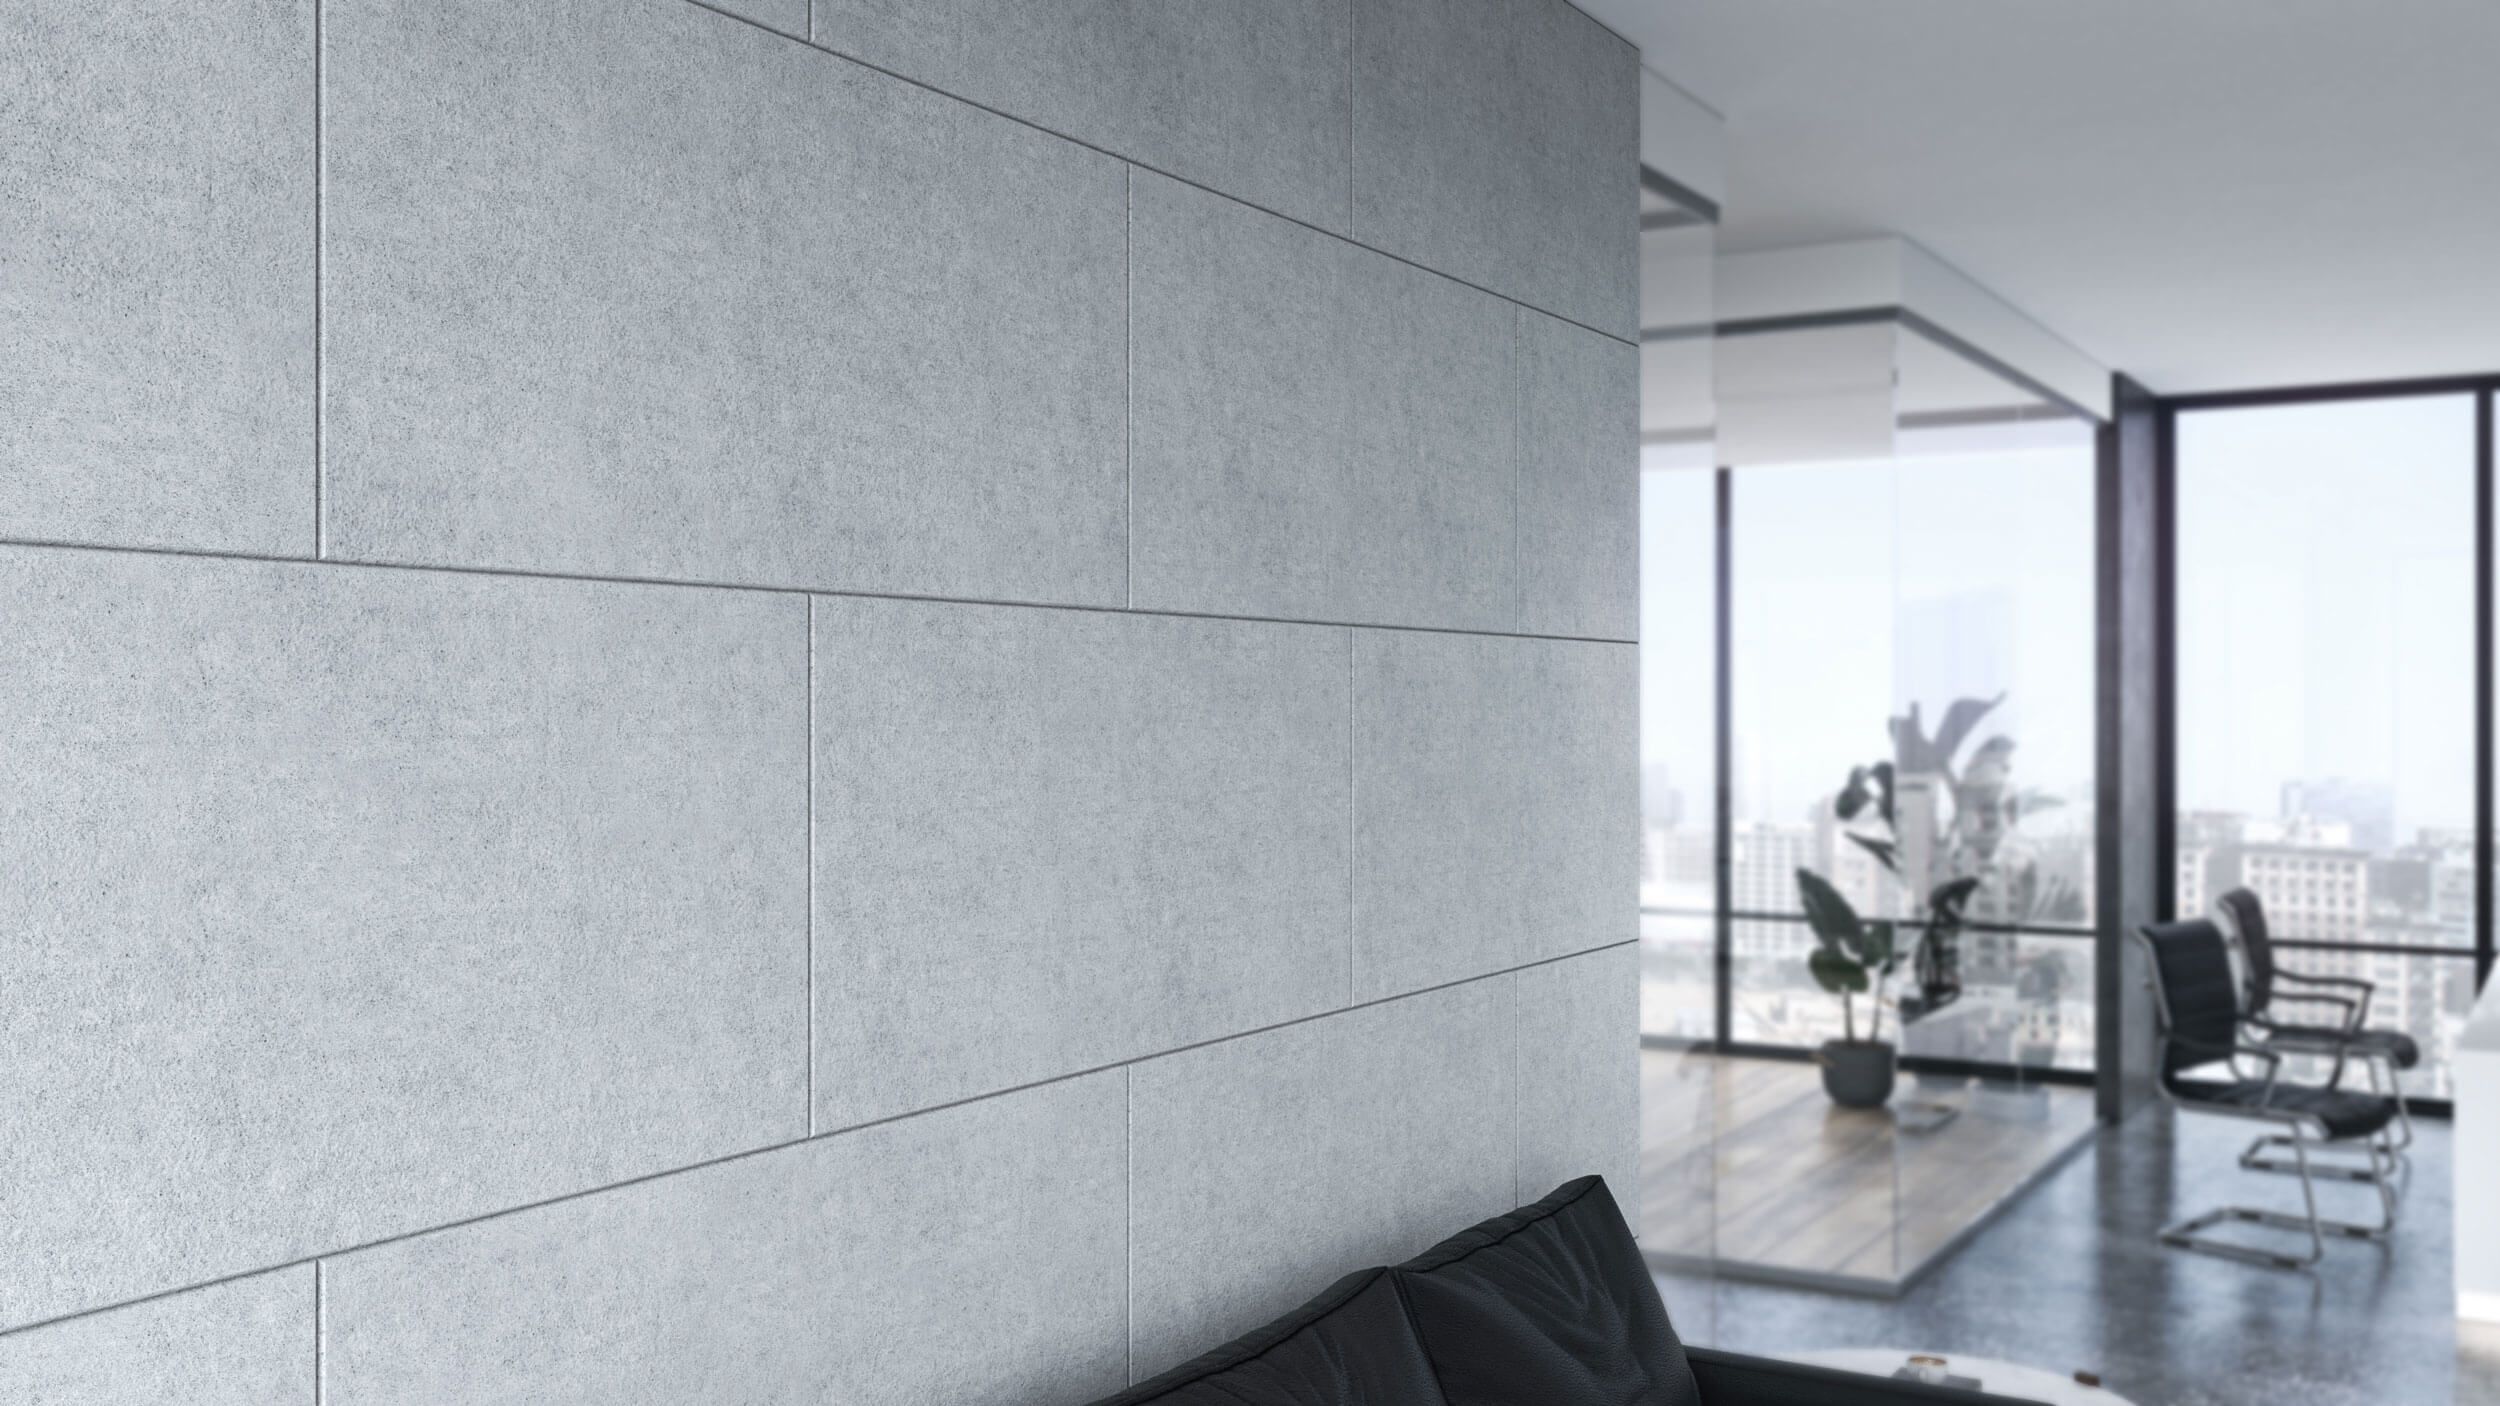 Lamvin Acoustical wall products